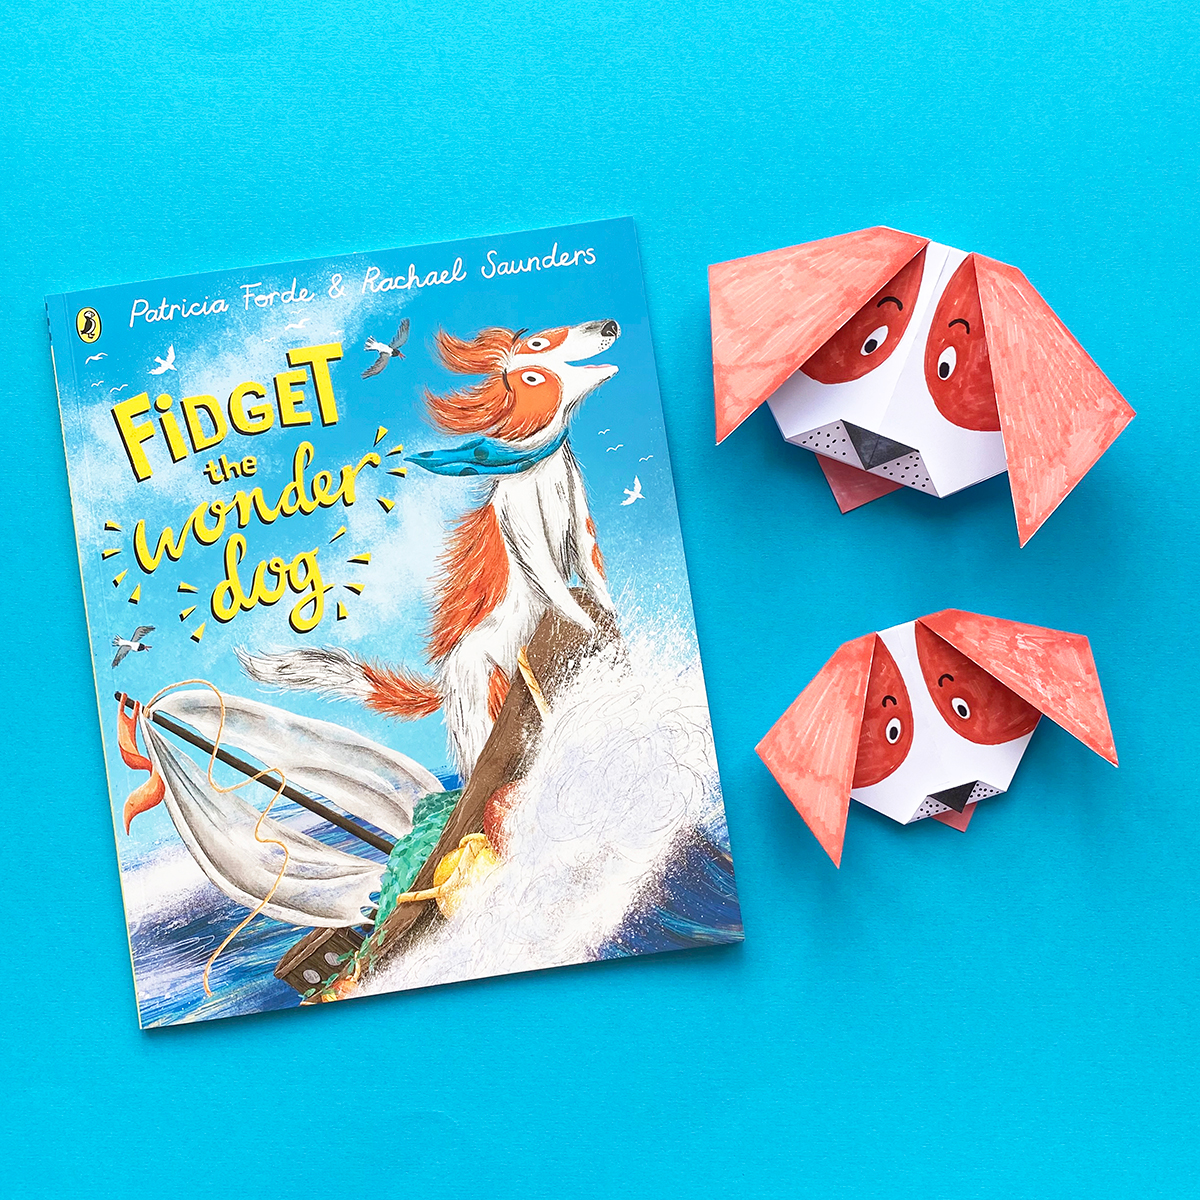 Photo of the book Fidget the Wonder Dog with two origami dogs on a blue background